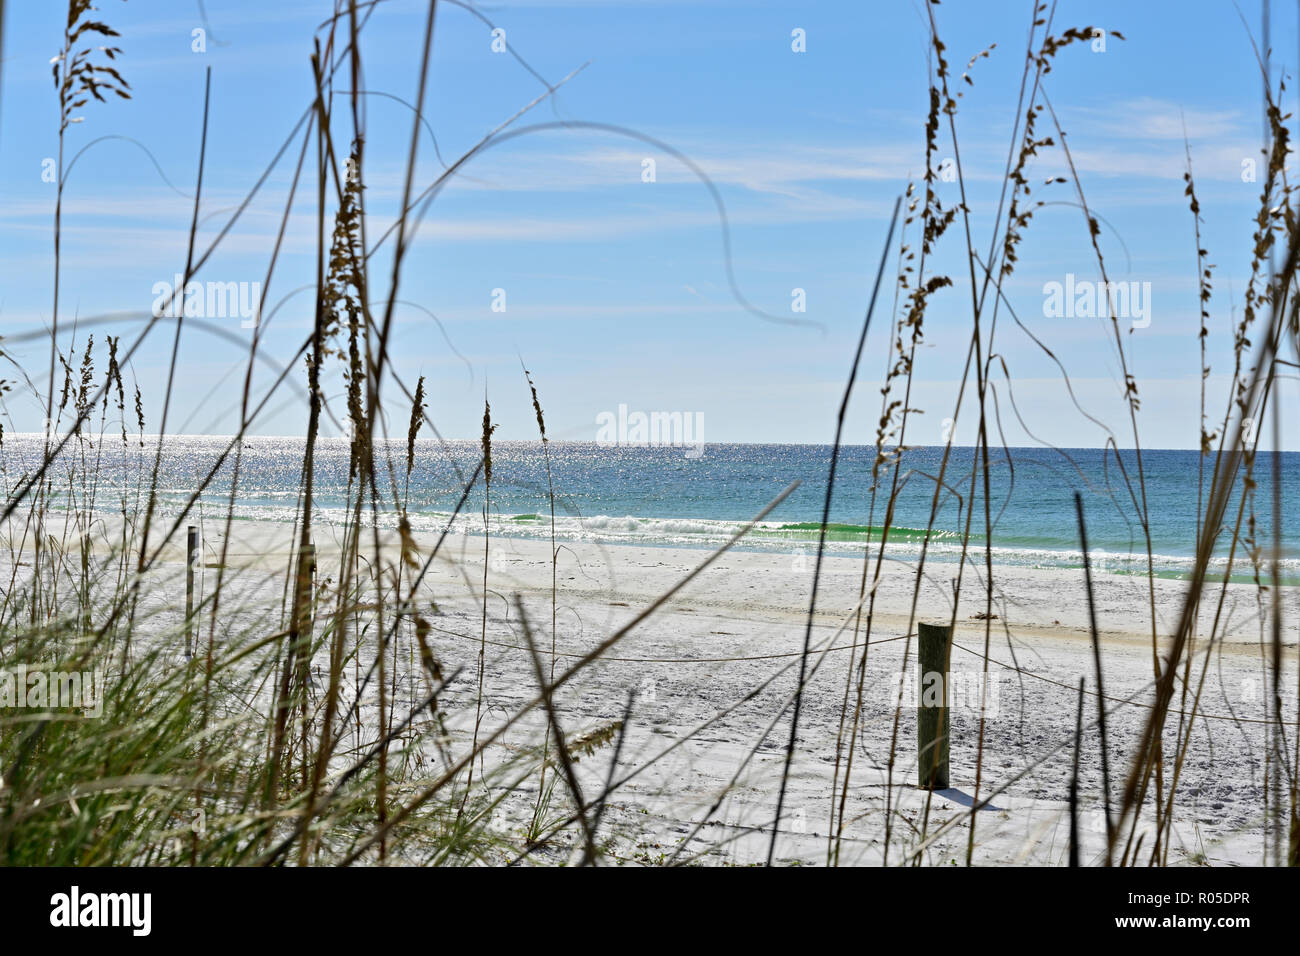 View of protected sea oats and the Gulf of Mexico along white sand or sandy Florida Gulf Coast beach in the Florida panhandle, USA. Stock Photo